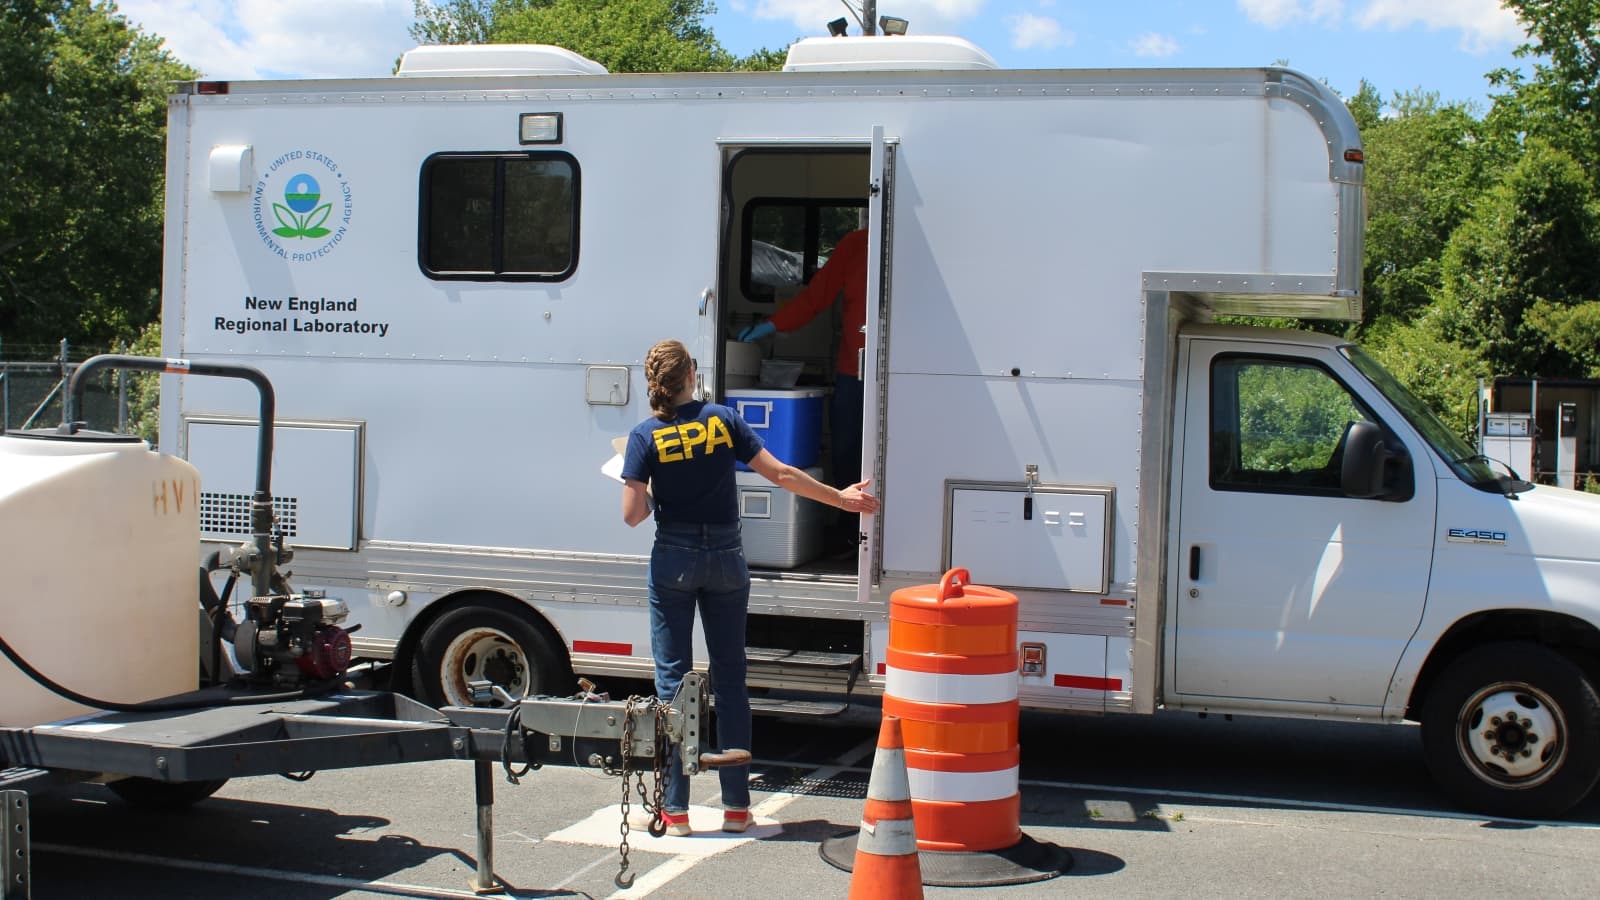 The EPA is operating a mobile laboratory to test soil samples from Bliss Corner during the cleanup.(Ben Berke/The Public's Radio)